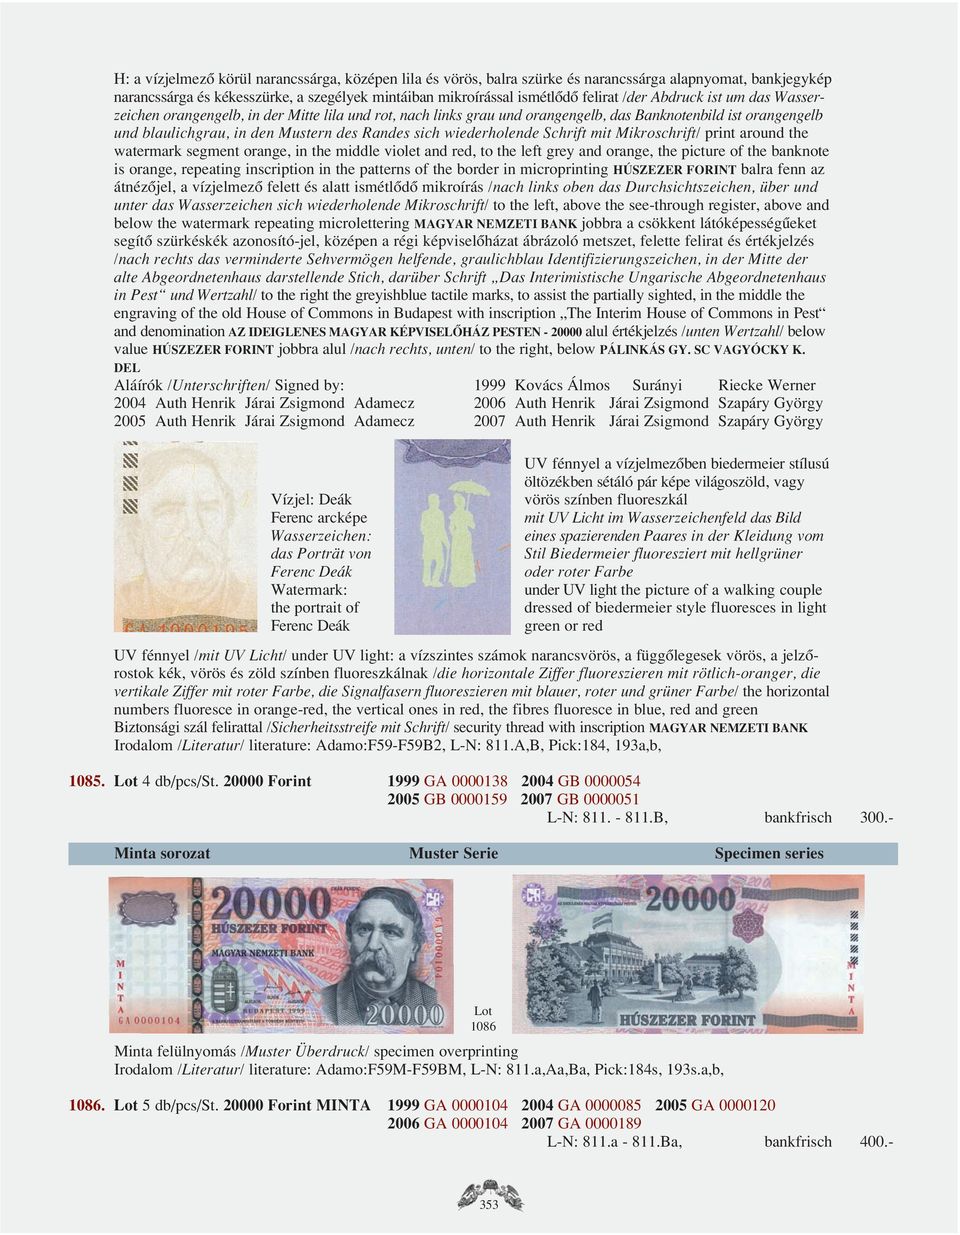 wiederholende Schrift mit Mikroschrift/ print around the watermark segment orange, in the middle violet and red, to the left grey and orange, the picture of the banknote is orange, repeating